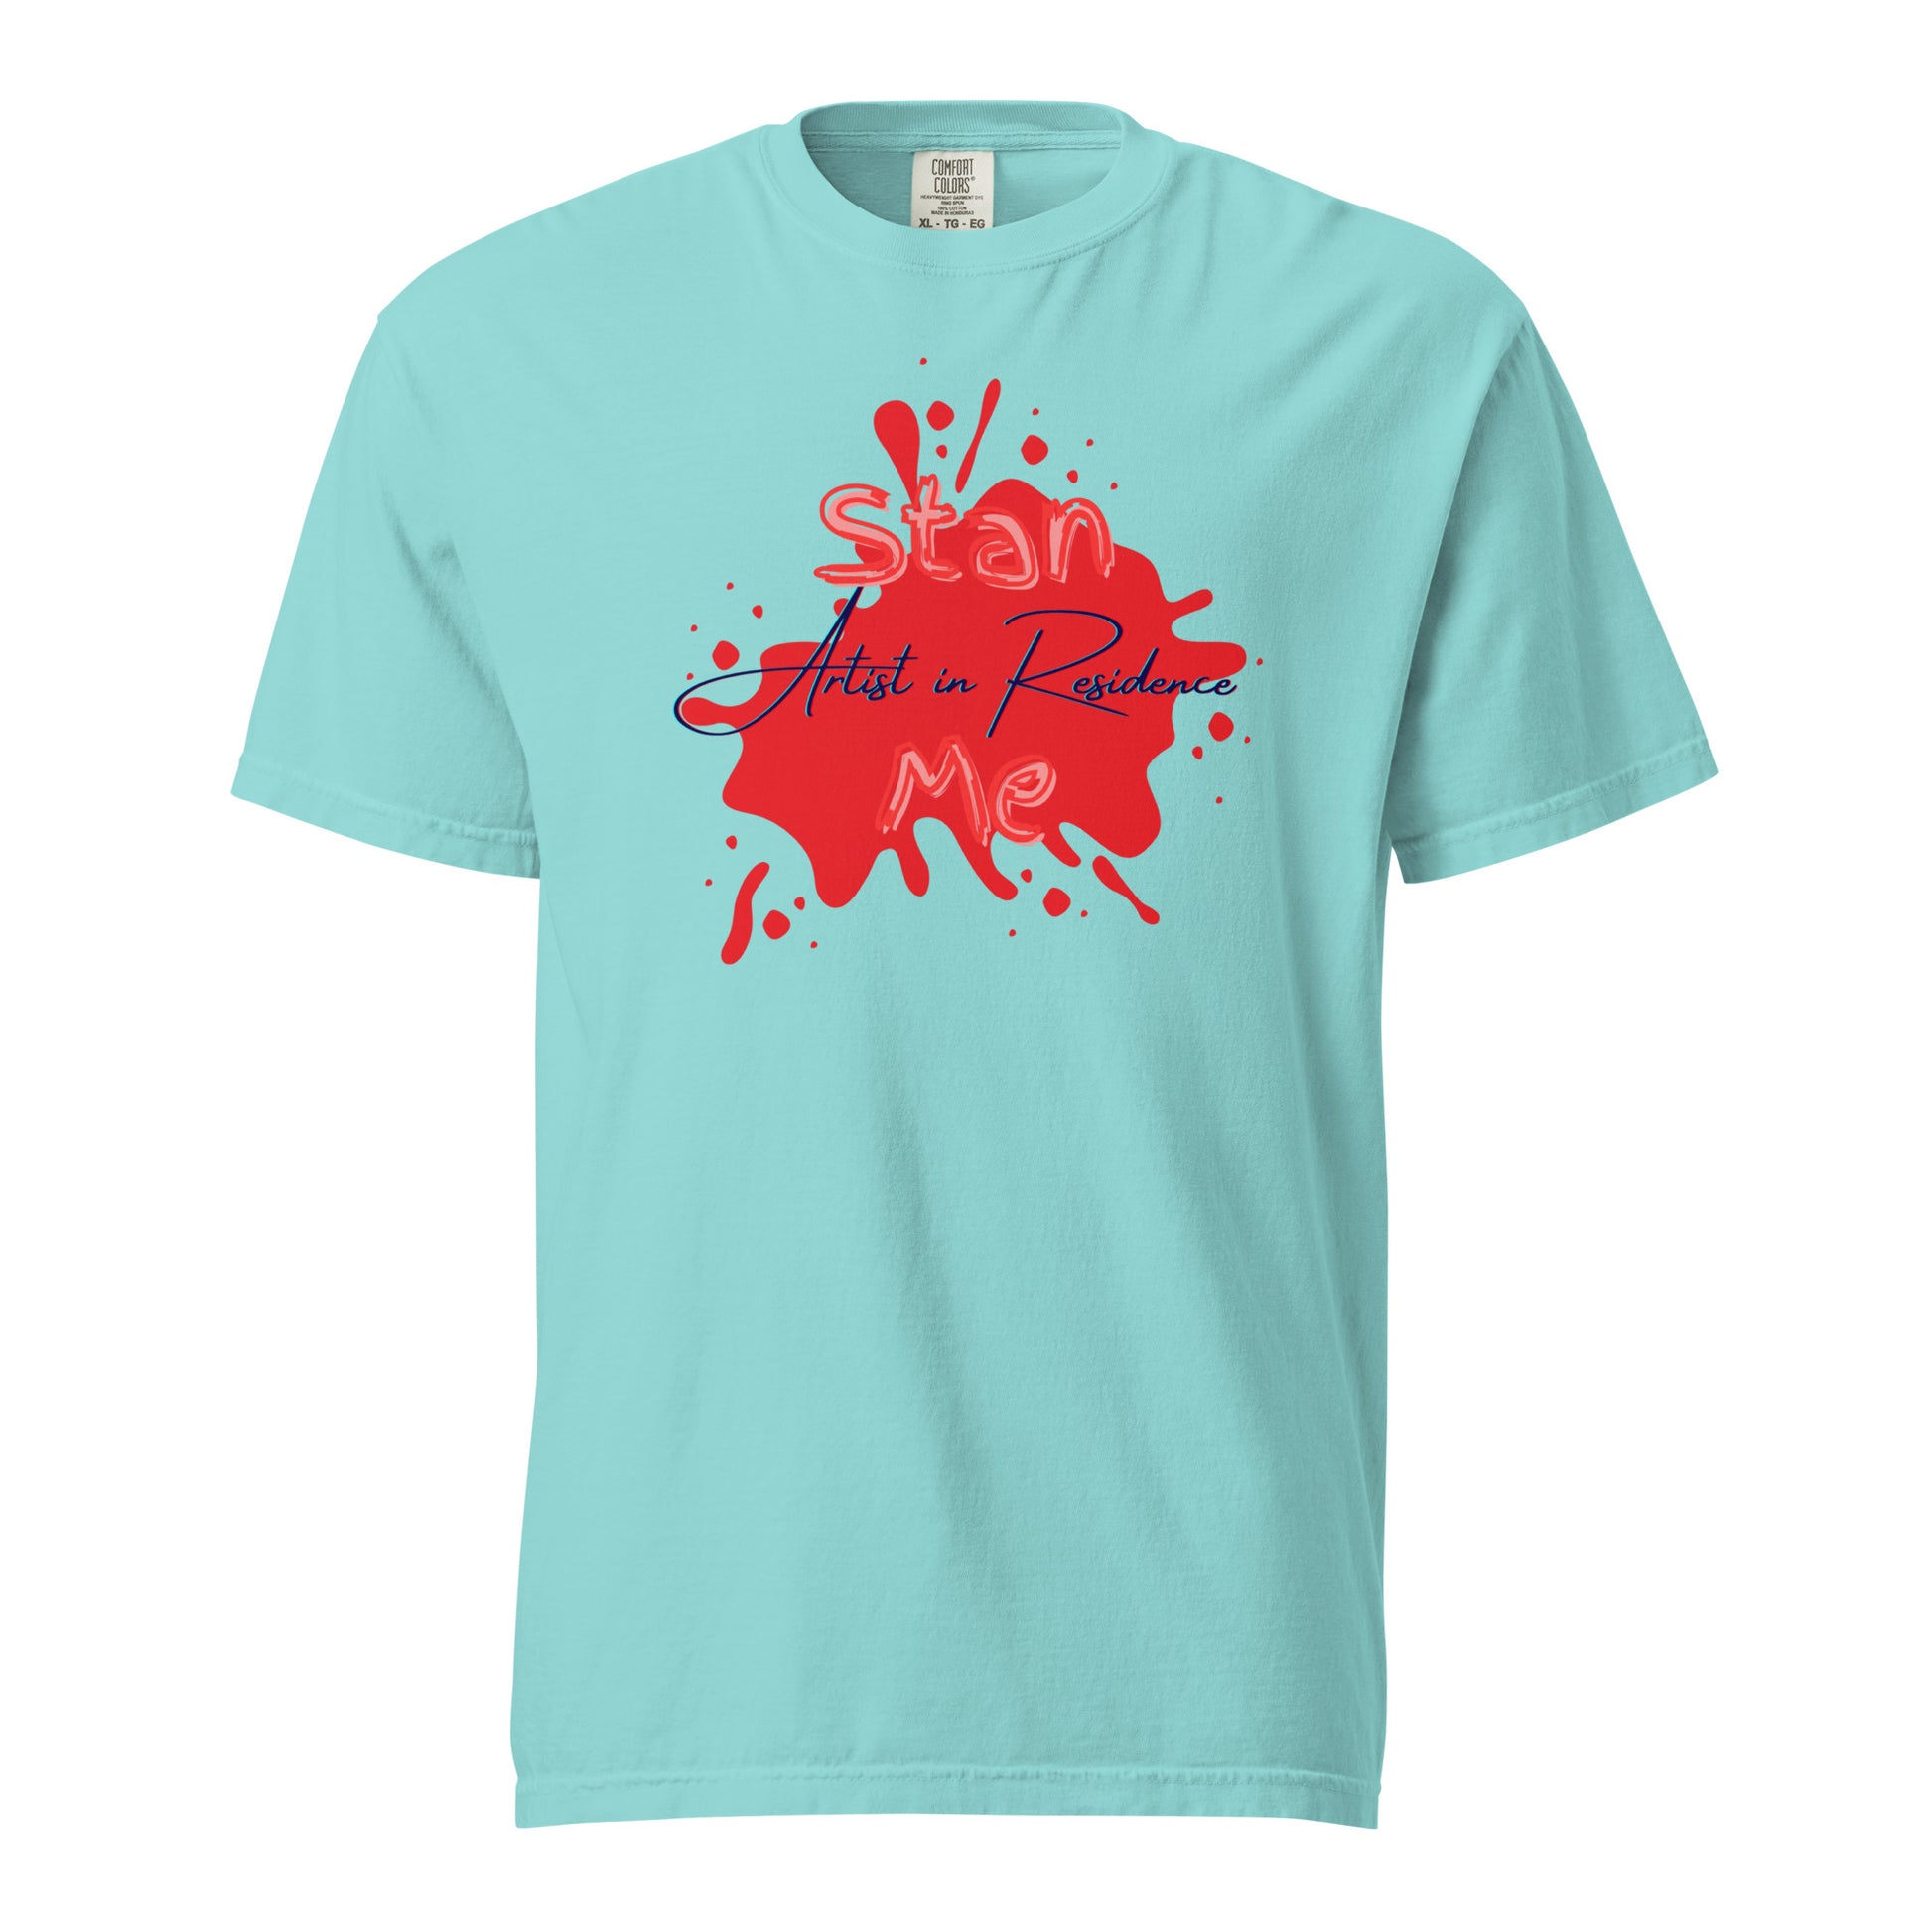 “Stan Me, Artist in Residence” tees featuring paint splatter designs, blending artistic creativity with stan culture. Available in 8 unique styles. Perfect for artists looking to attract fans and gigs. turquoise tee